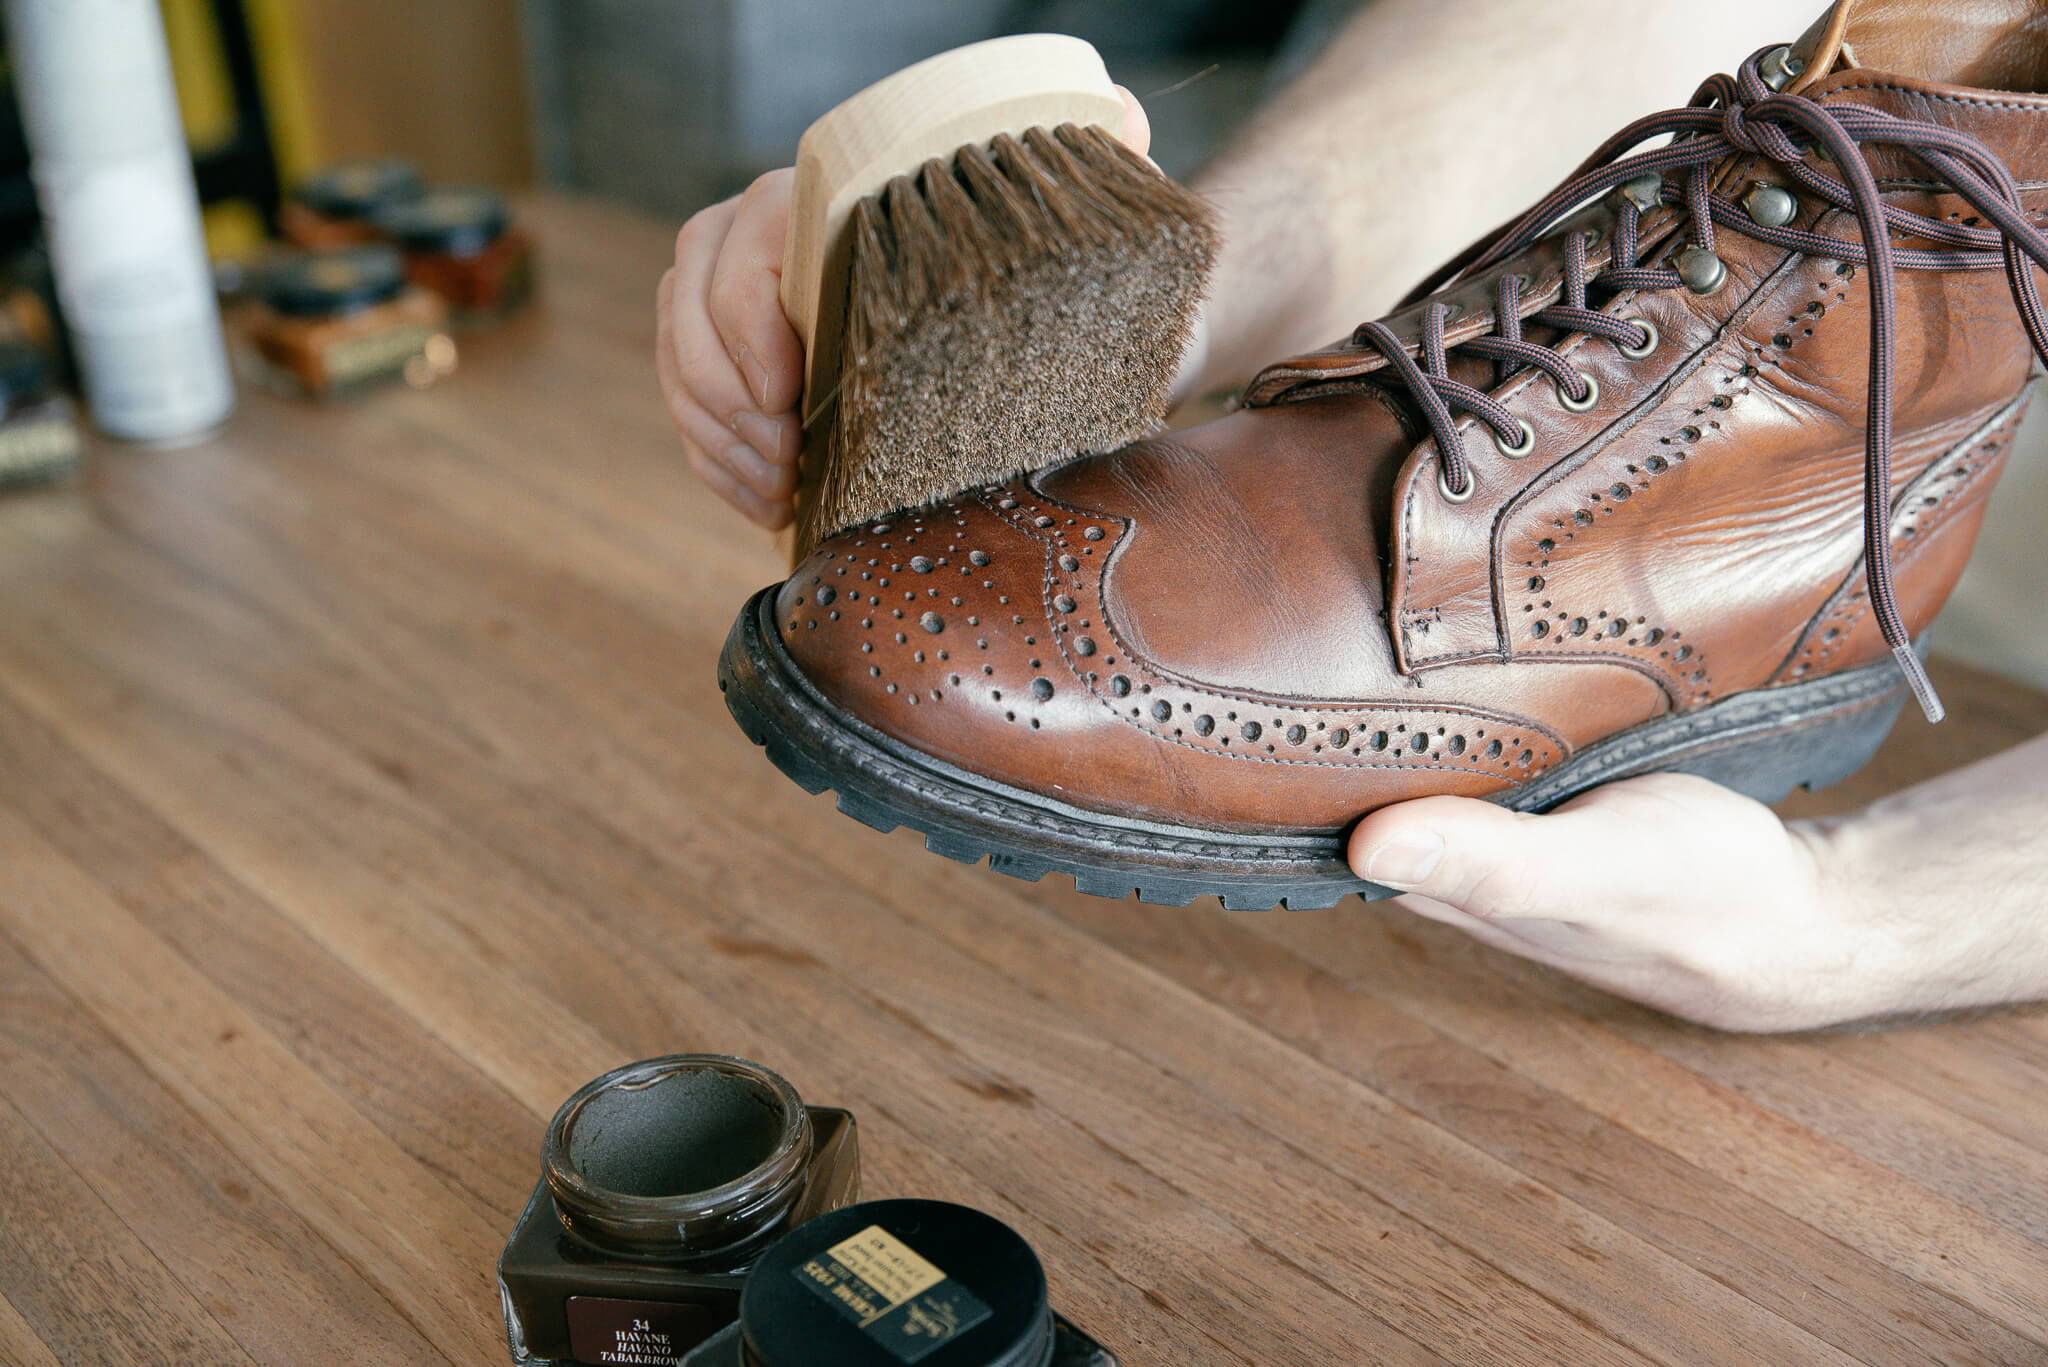 Homemade Shoe Polish  Homemade shoes, Leather shoes diy, Leather boots diy